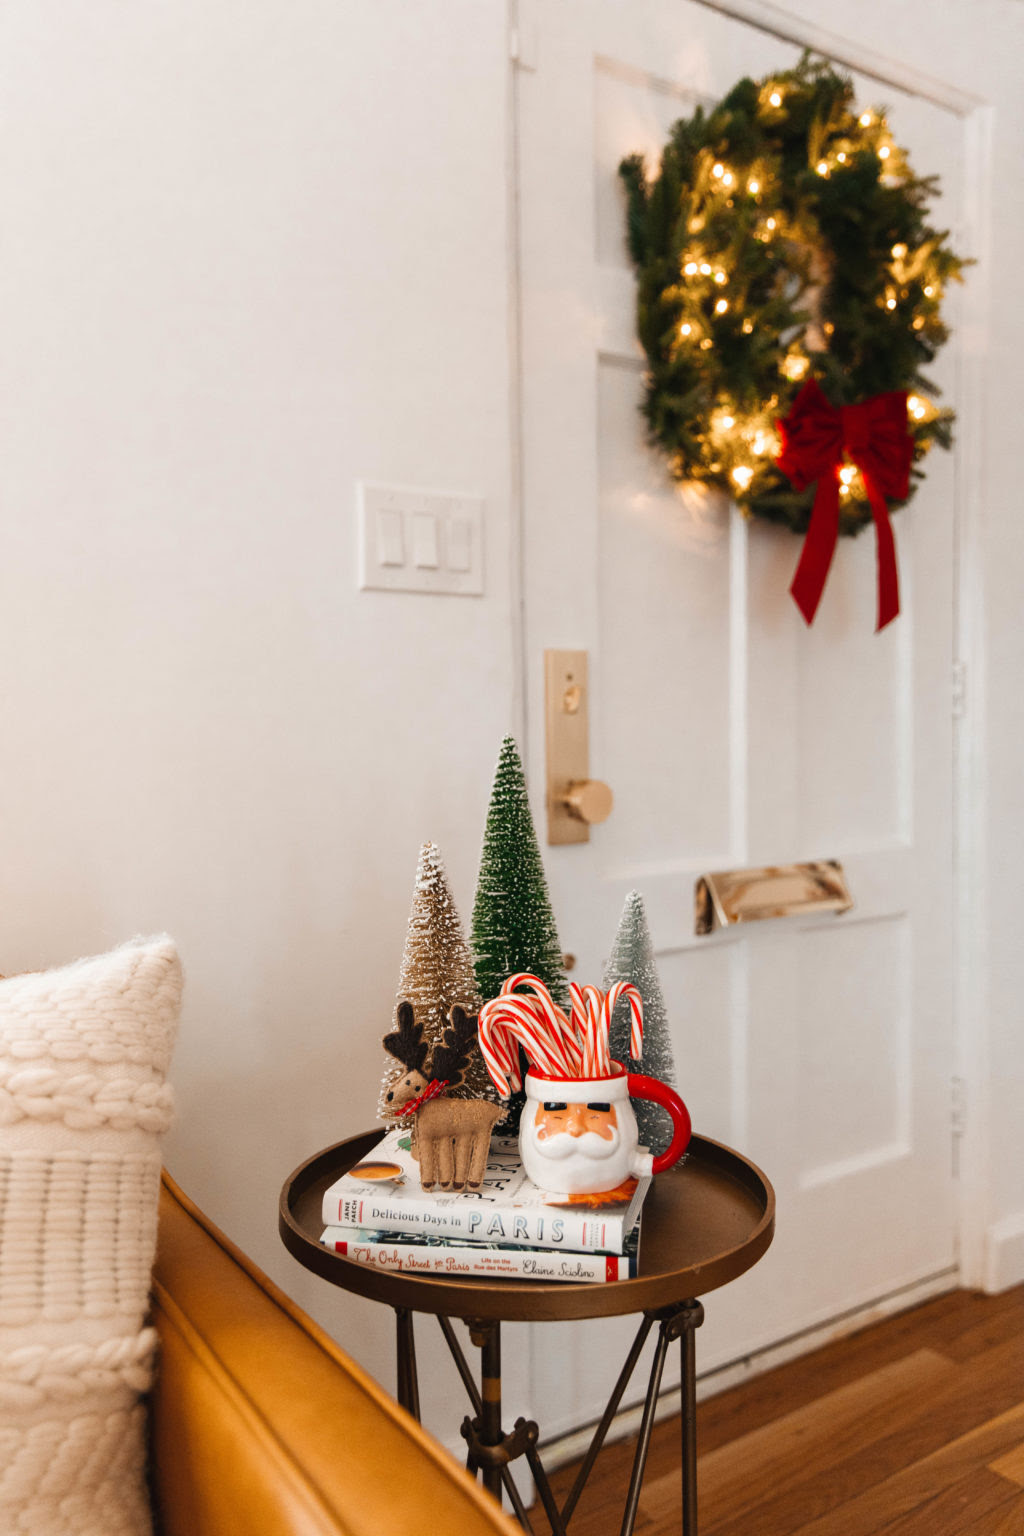 Holiday Decor Favorites with The Home Depot - New Darlings